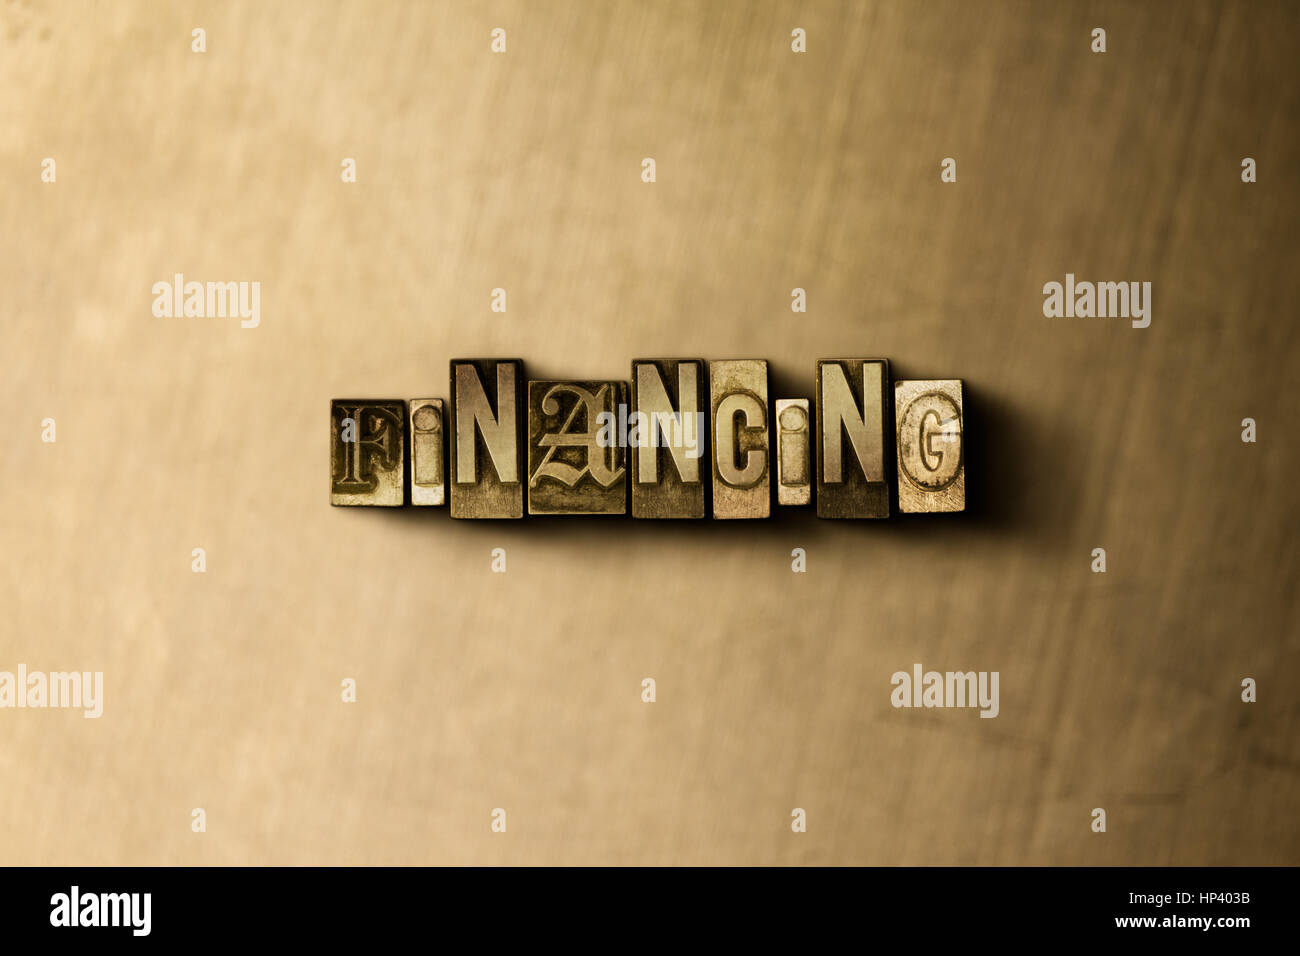 FINANCING - close-up of grungy vintage typeset word on metal backdrop. Royalty free stock illustration.  Can be used for online banner ads and direct  Stock Photo